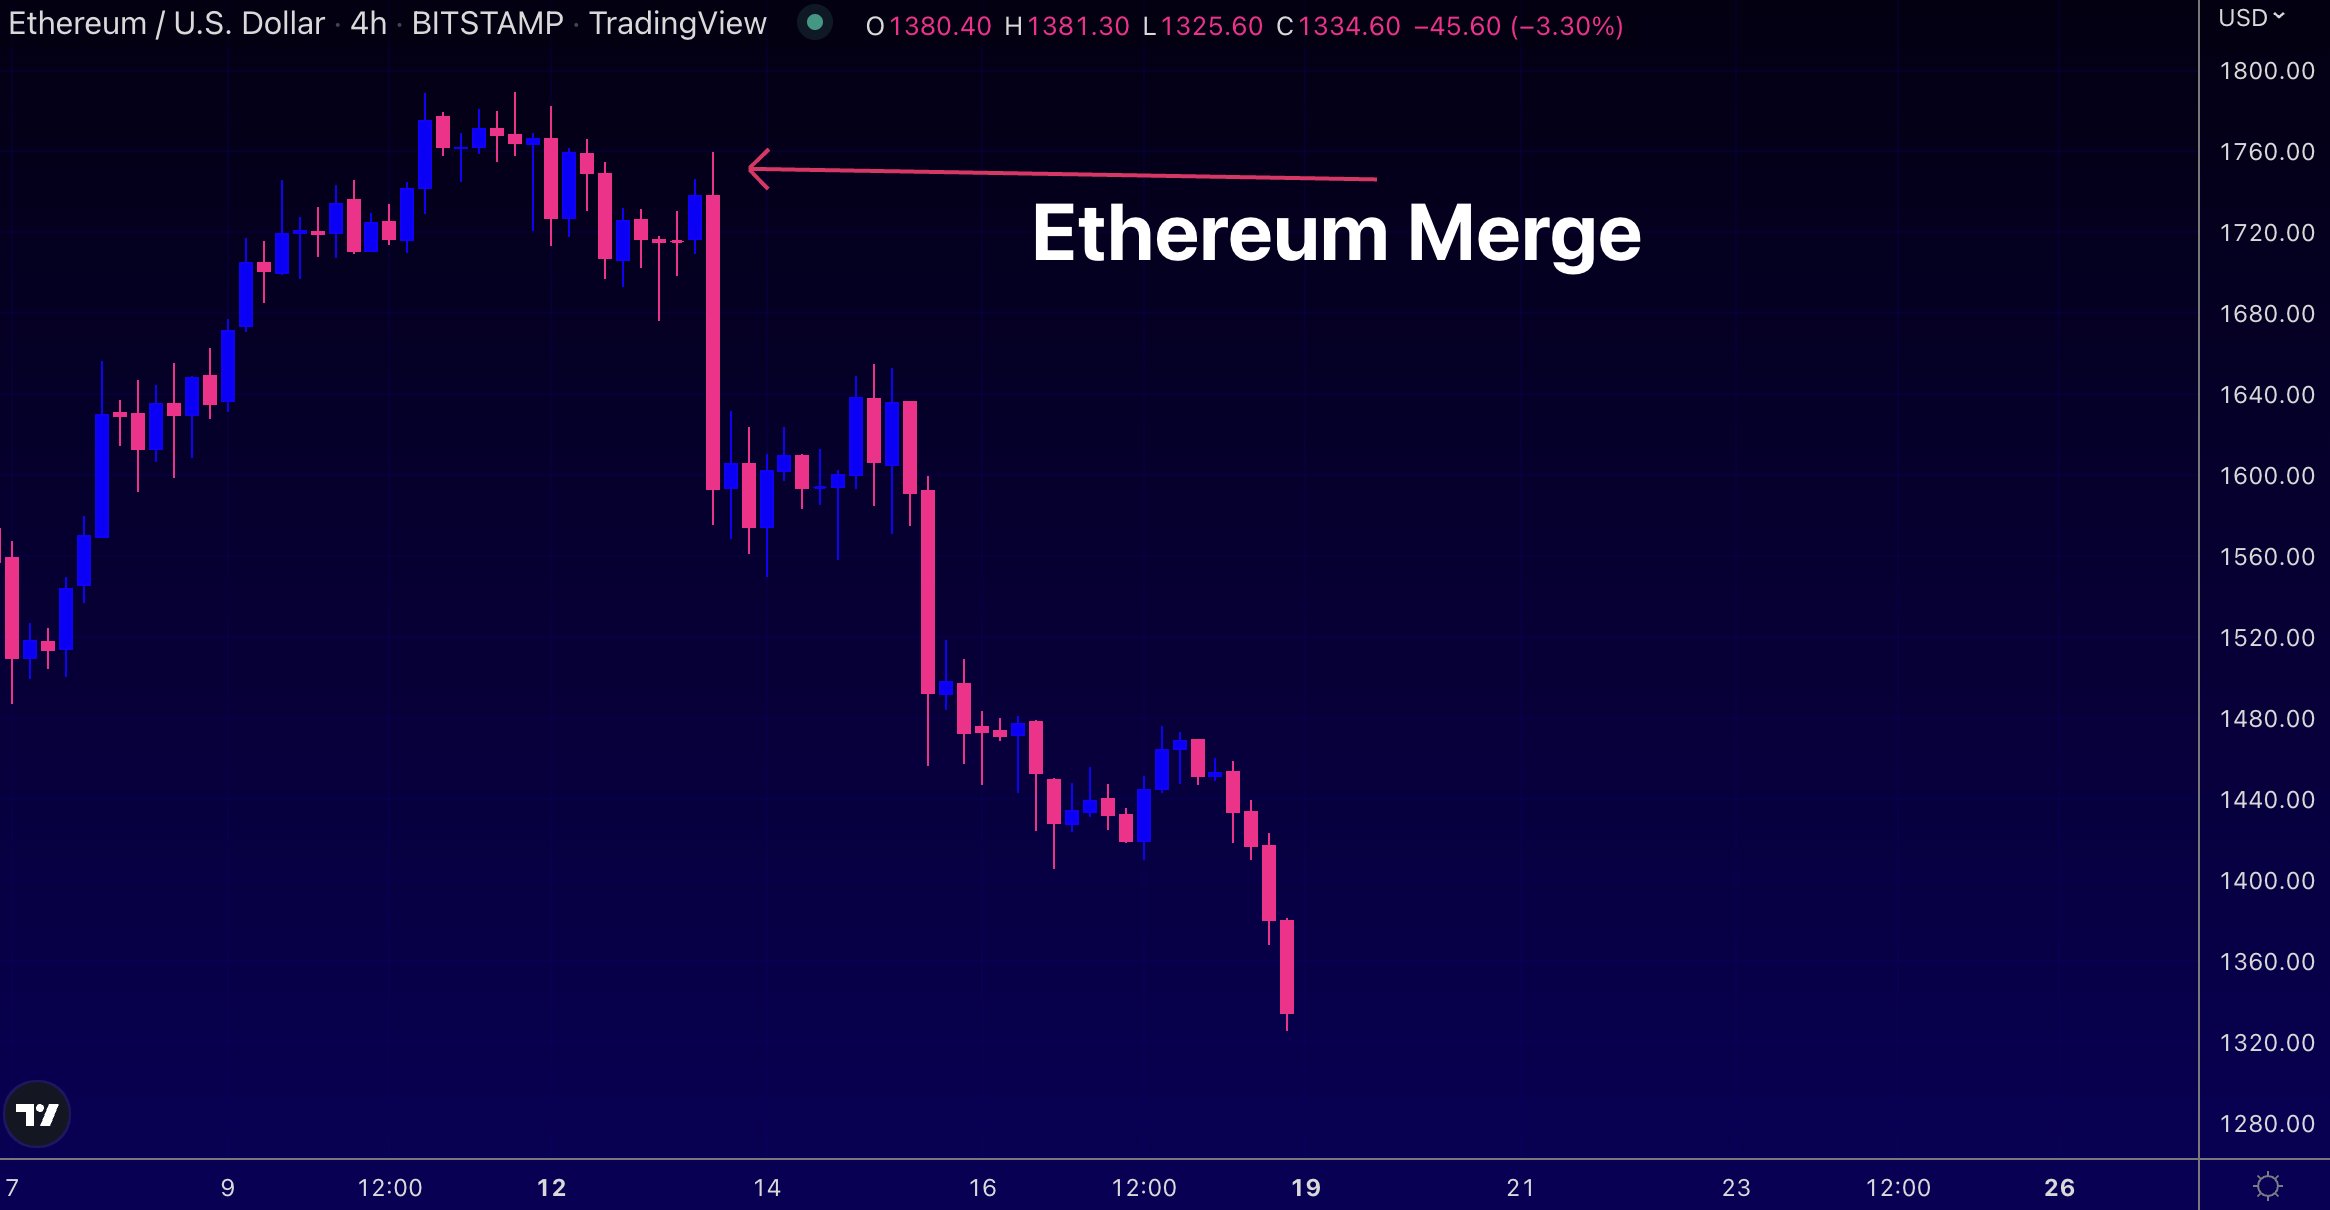 Are these altcoins dead? Ethereum, XRP and Cardano price trends show signs of weakness